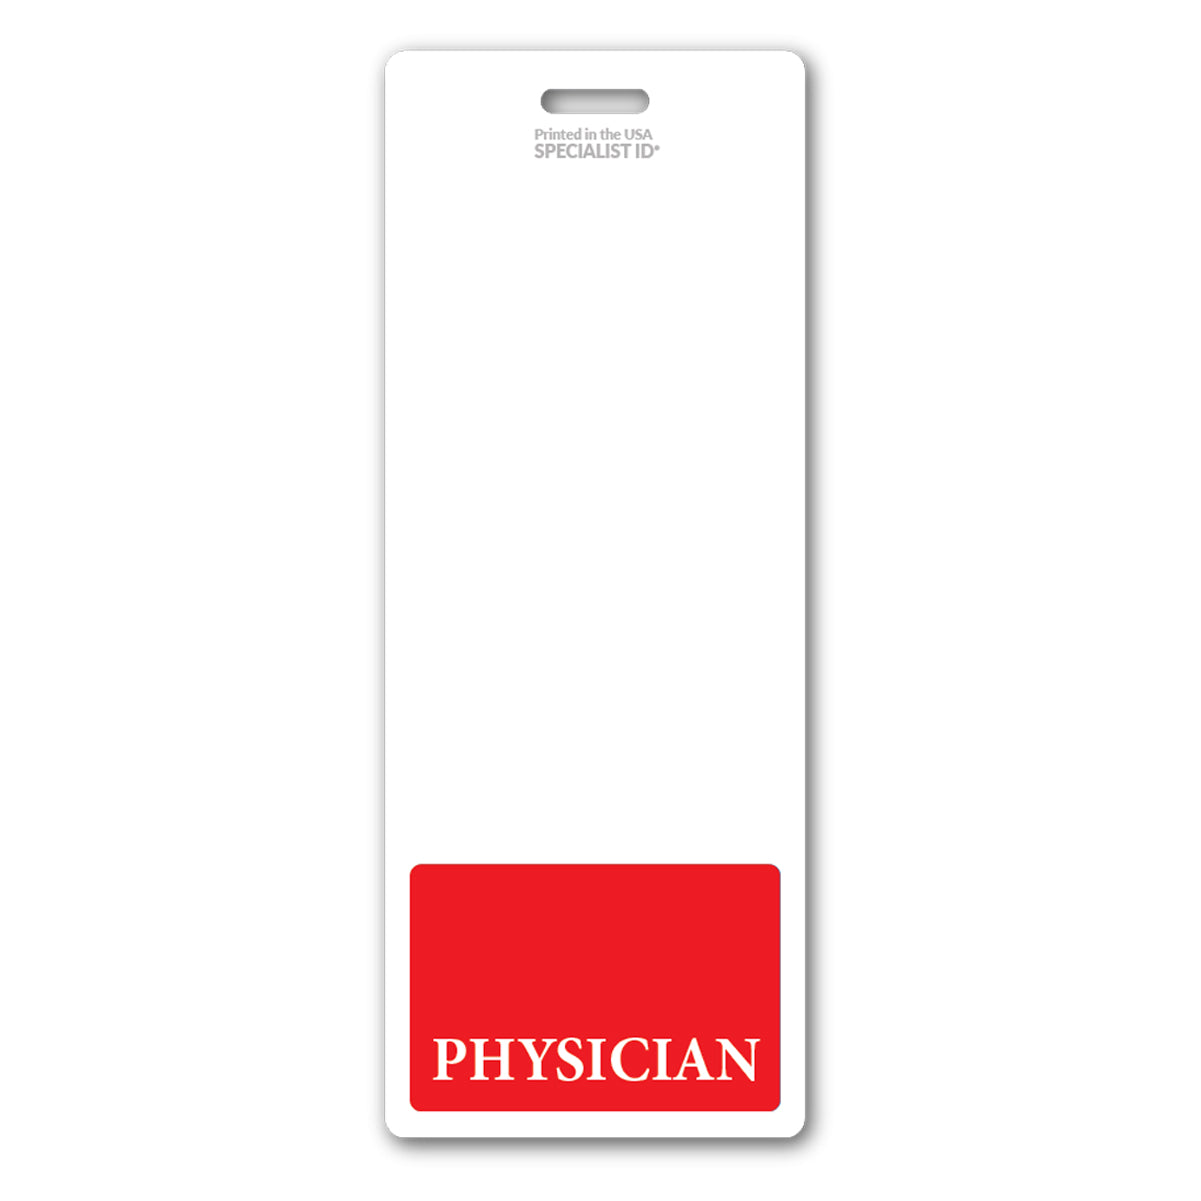 oversized physician badge buddy vertical with red border- extra long to wear behind work ID badge